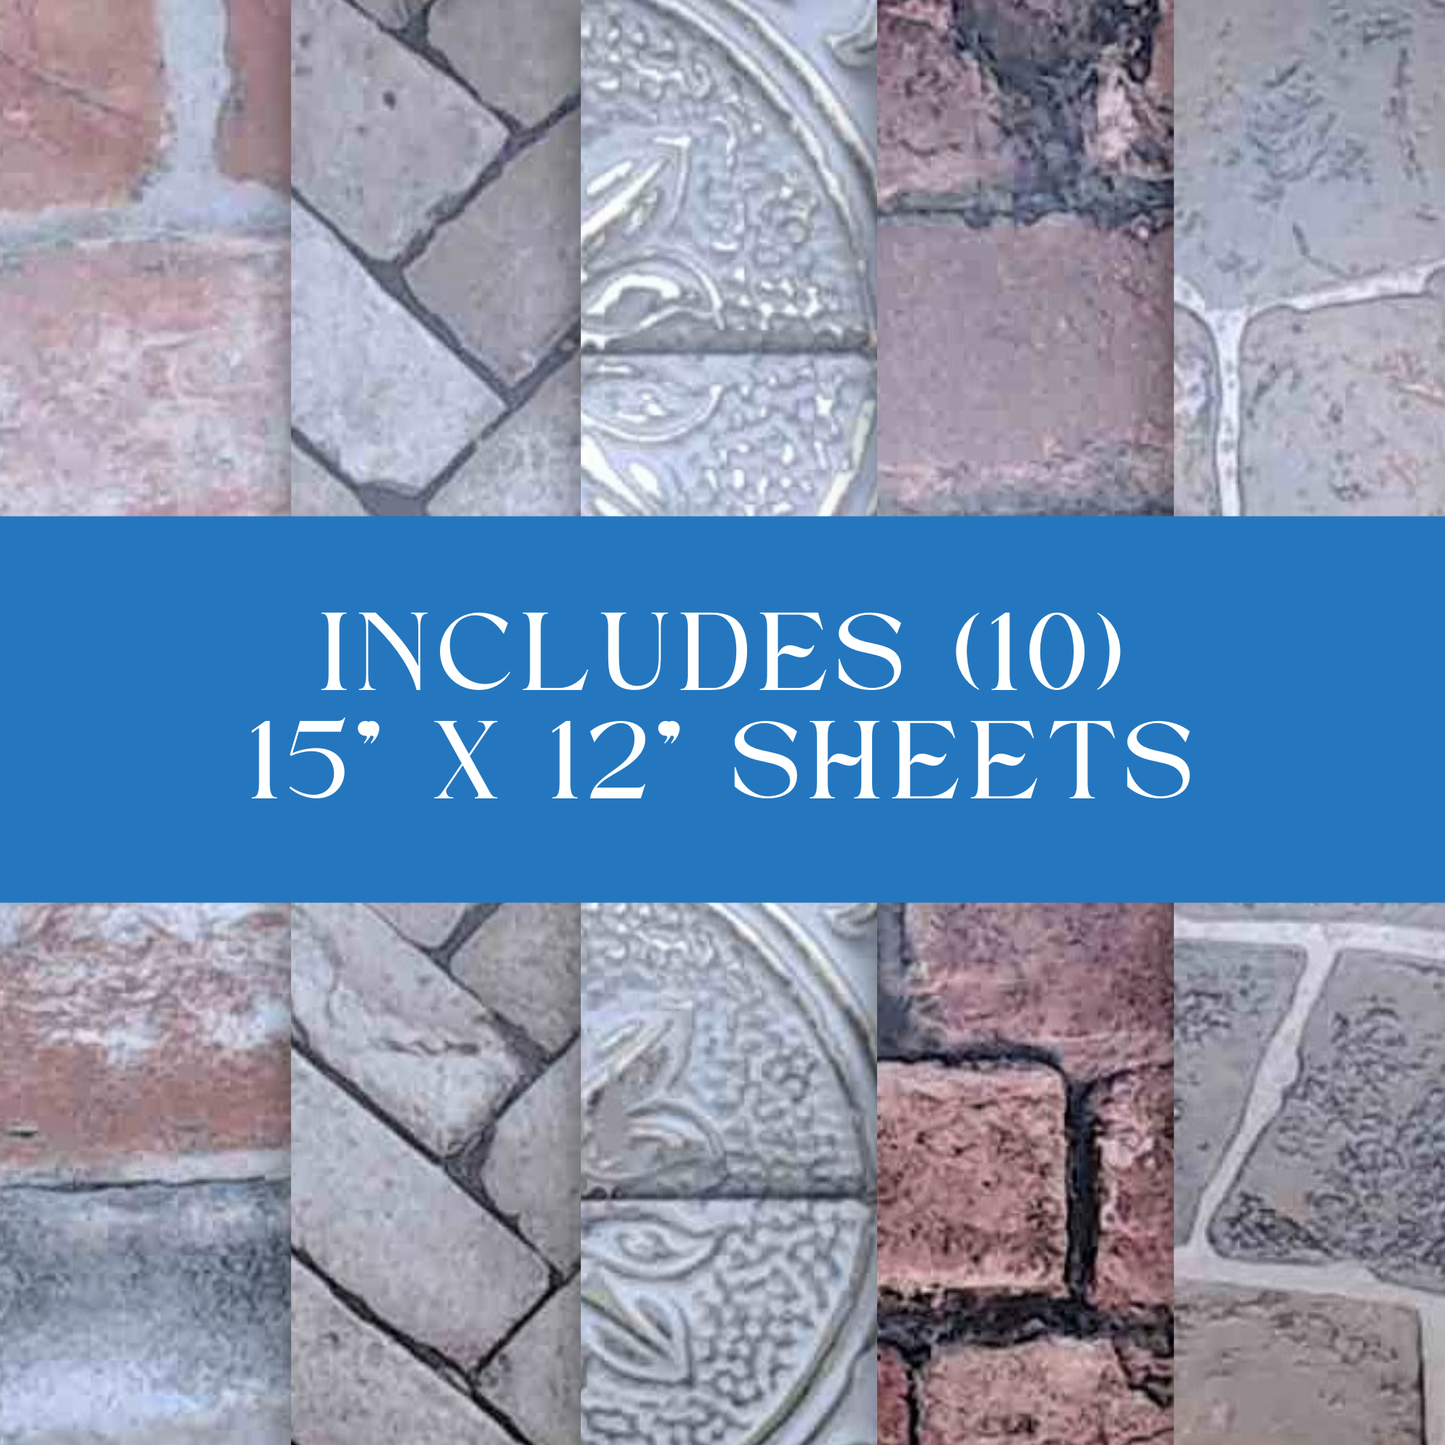 Industrial Stone, Tiles and Metal Wallpaper Sample Book Sheets - set of (10) sheets for Crafts, Junk Journals, Mixed Media and Collage Art